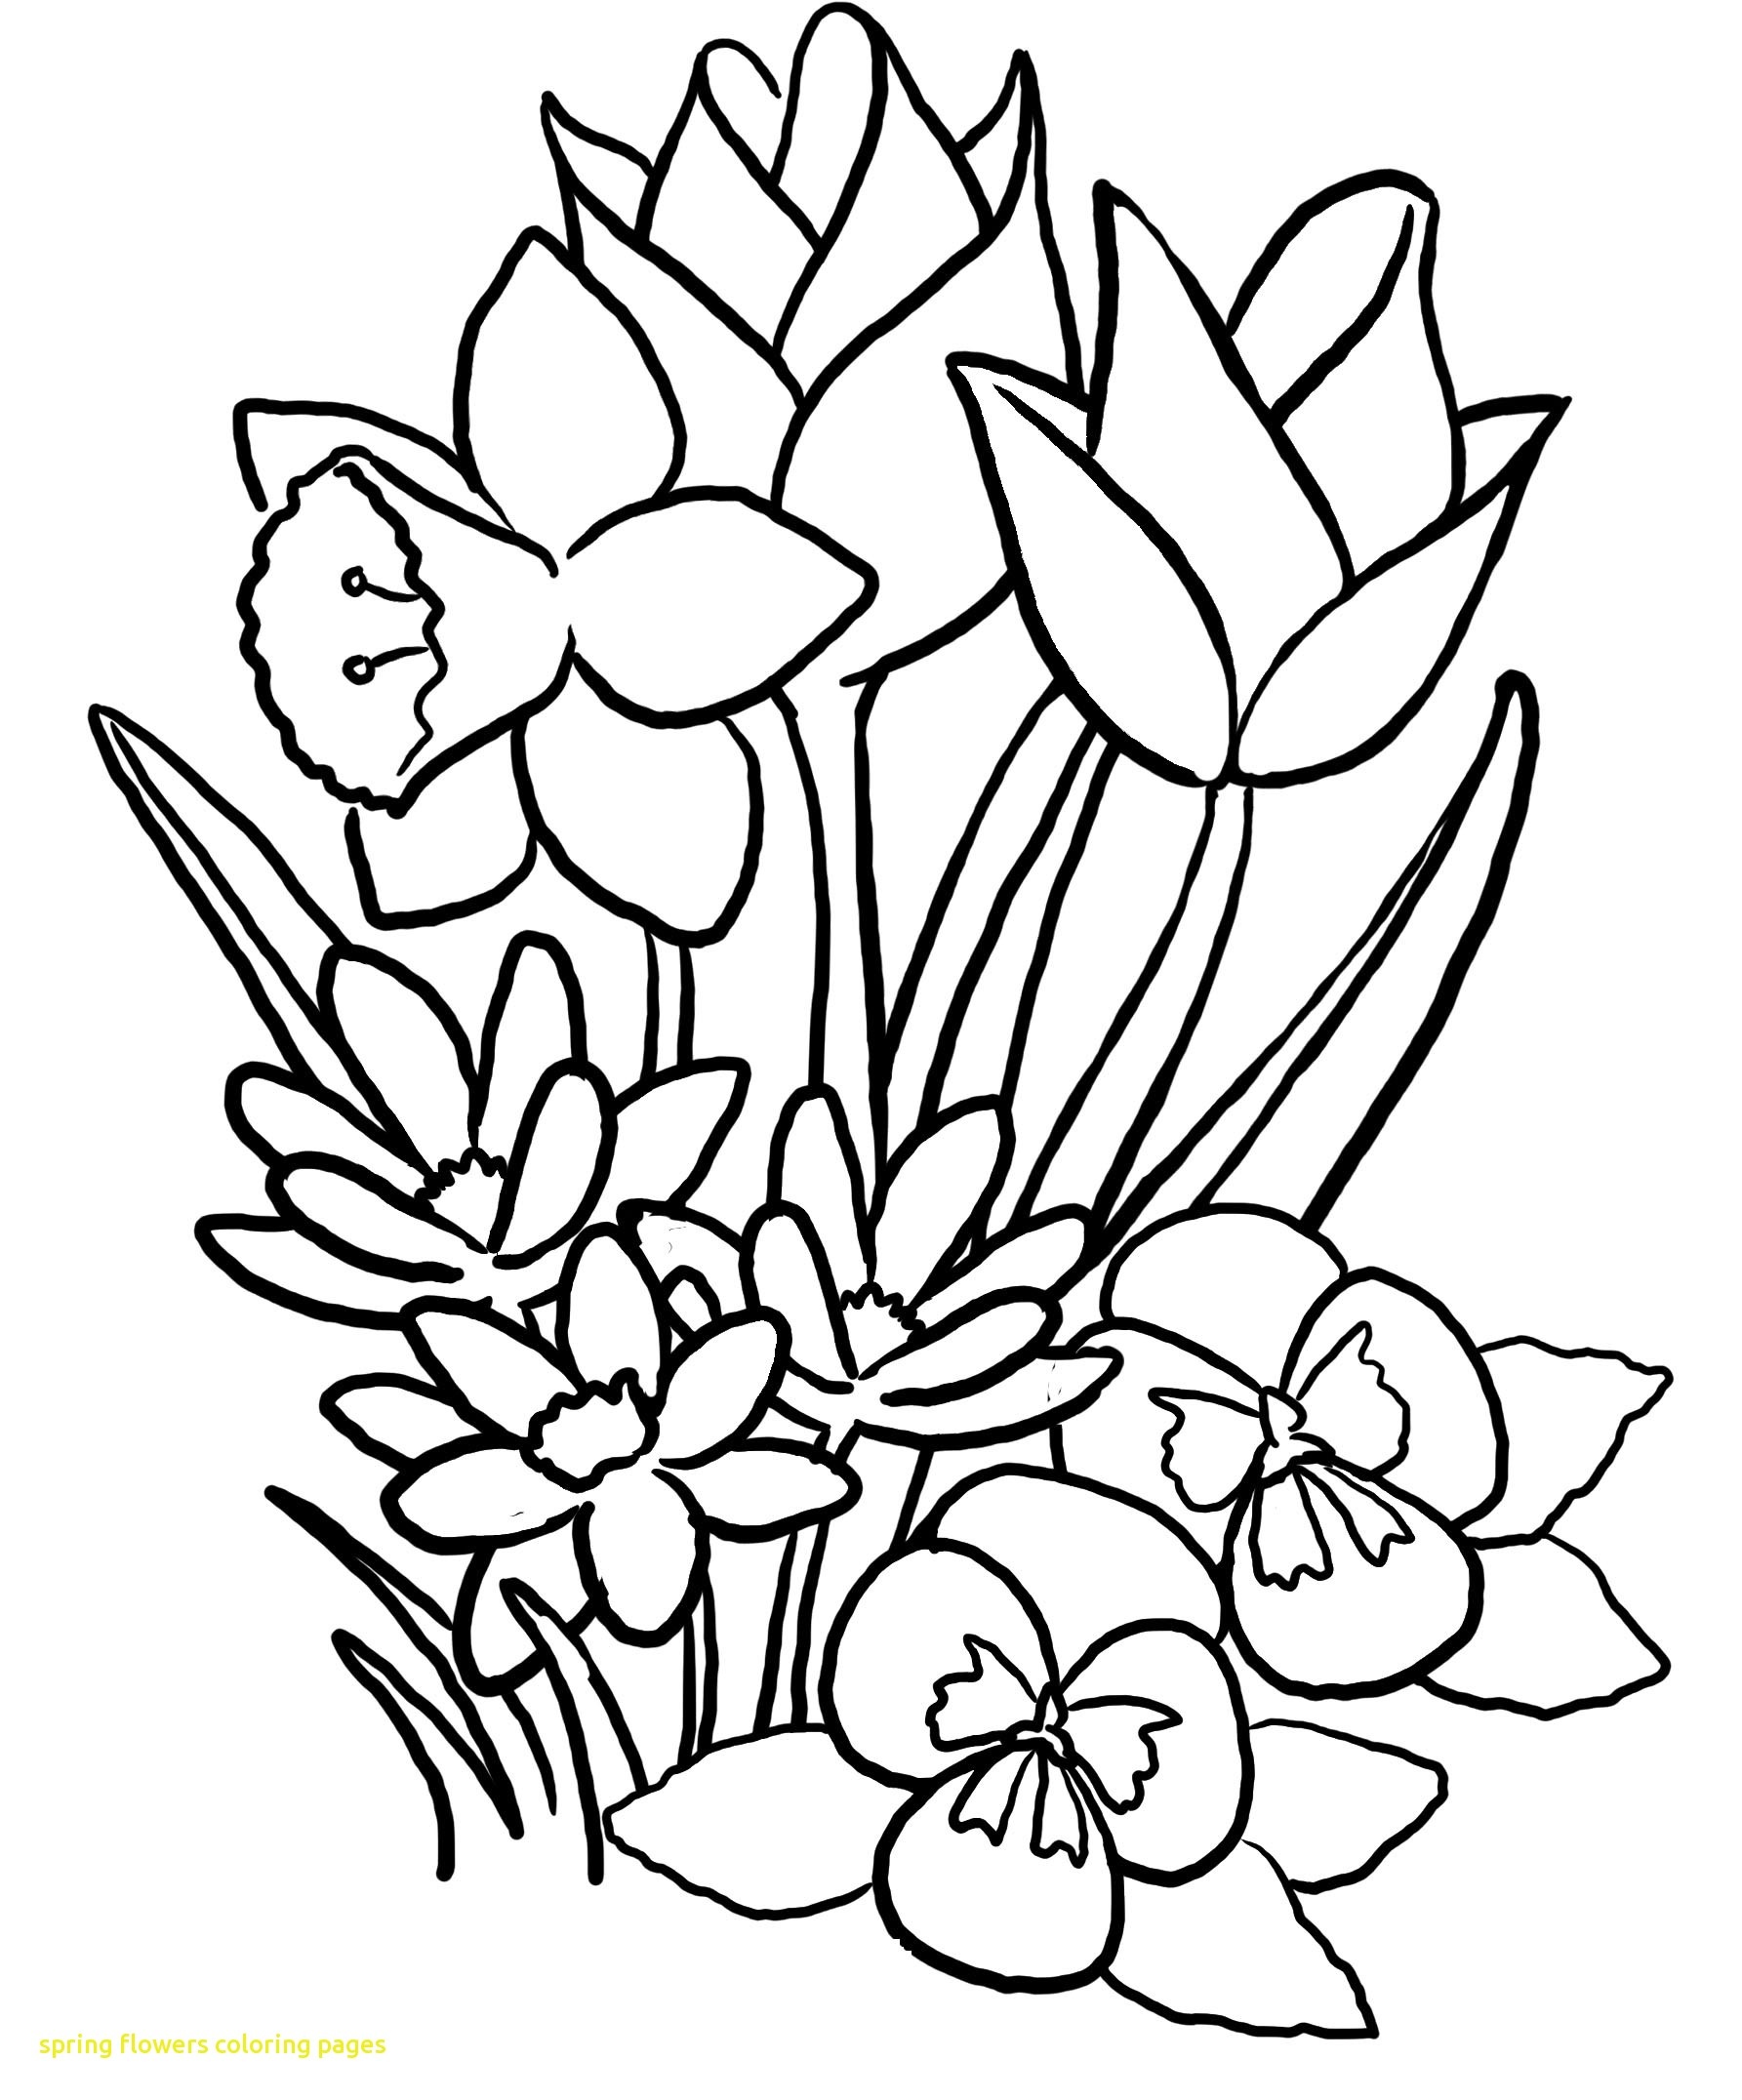 Cartoon Flower Coloring Pages at GetColorings.com | Free printable